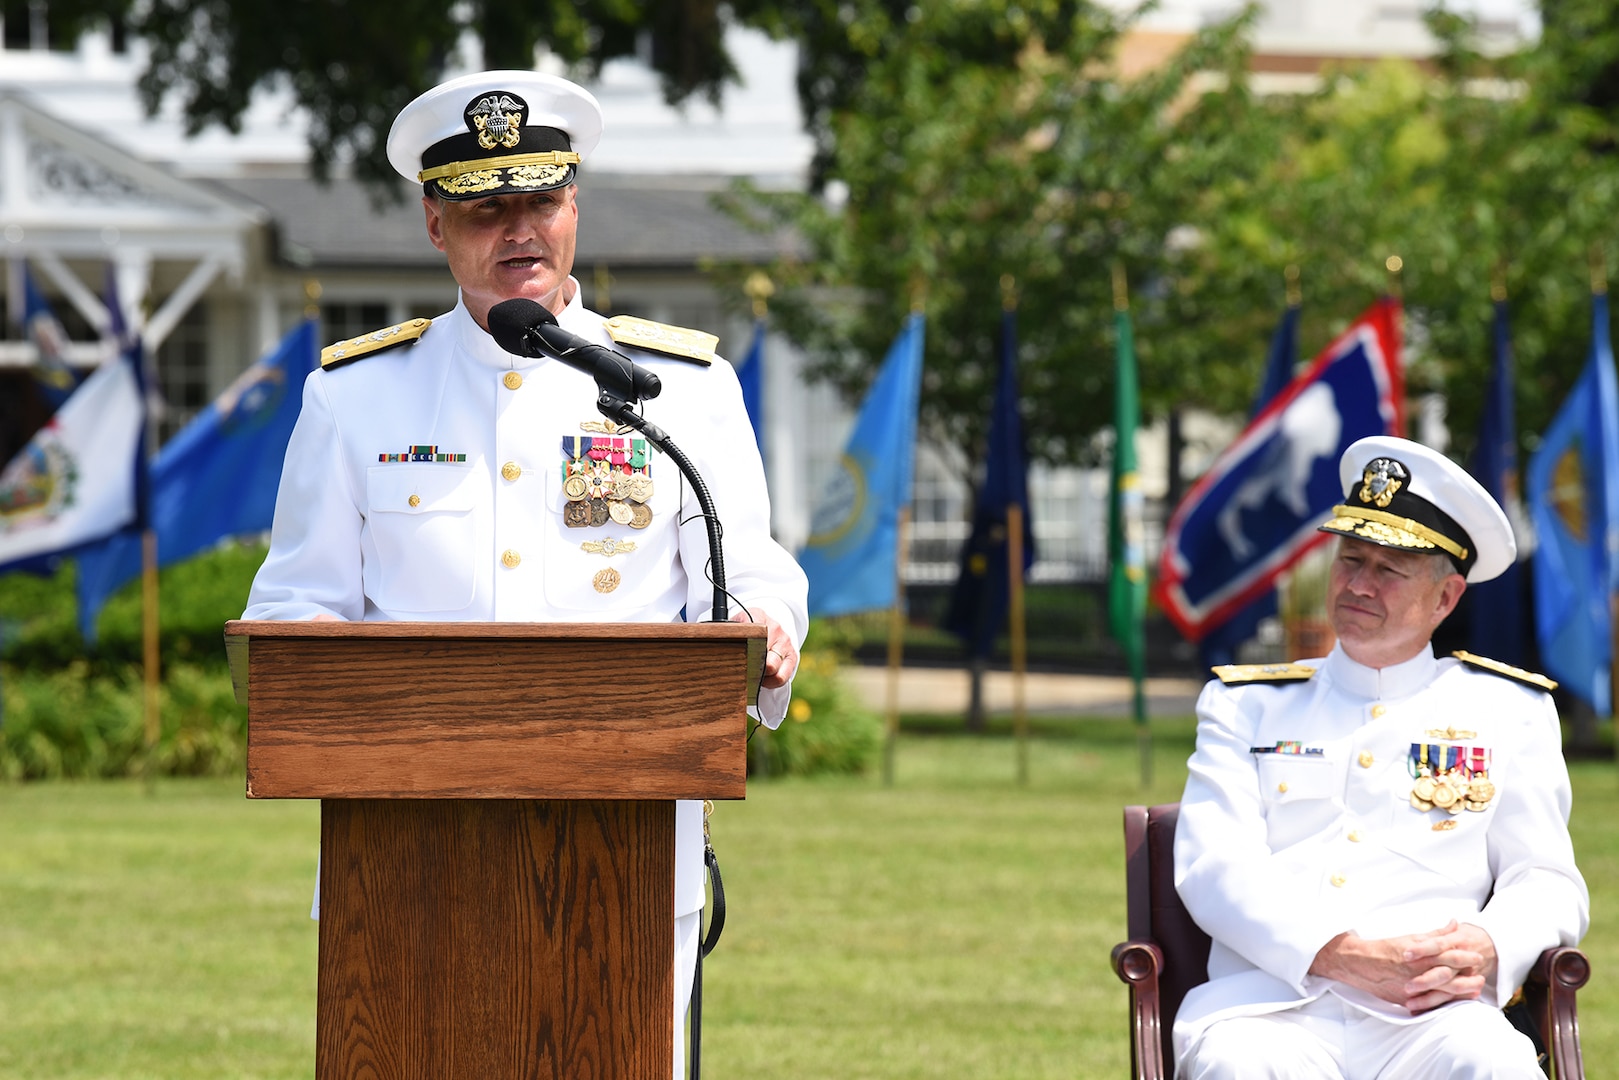 Vice Admiral William J. Galinis, left, speaks as Vice Admiral Thomas Moore looks on during a Change of Command ceremony for Naval Sea Systems Command (NAVSEA). Galinis took over for Moore as Commander, NAVSEA during the ceremony held in Leutze Park at Washington Navy Yard.